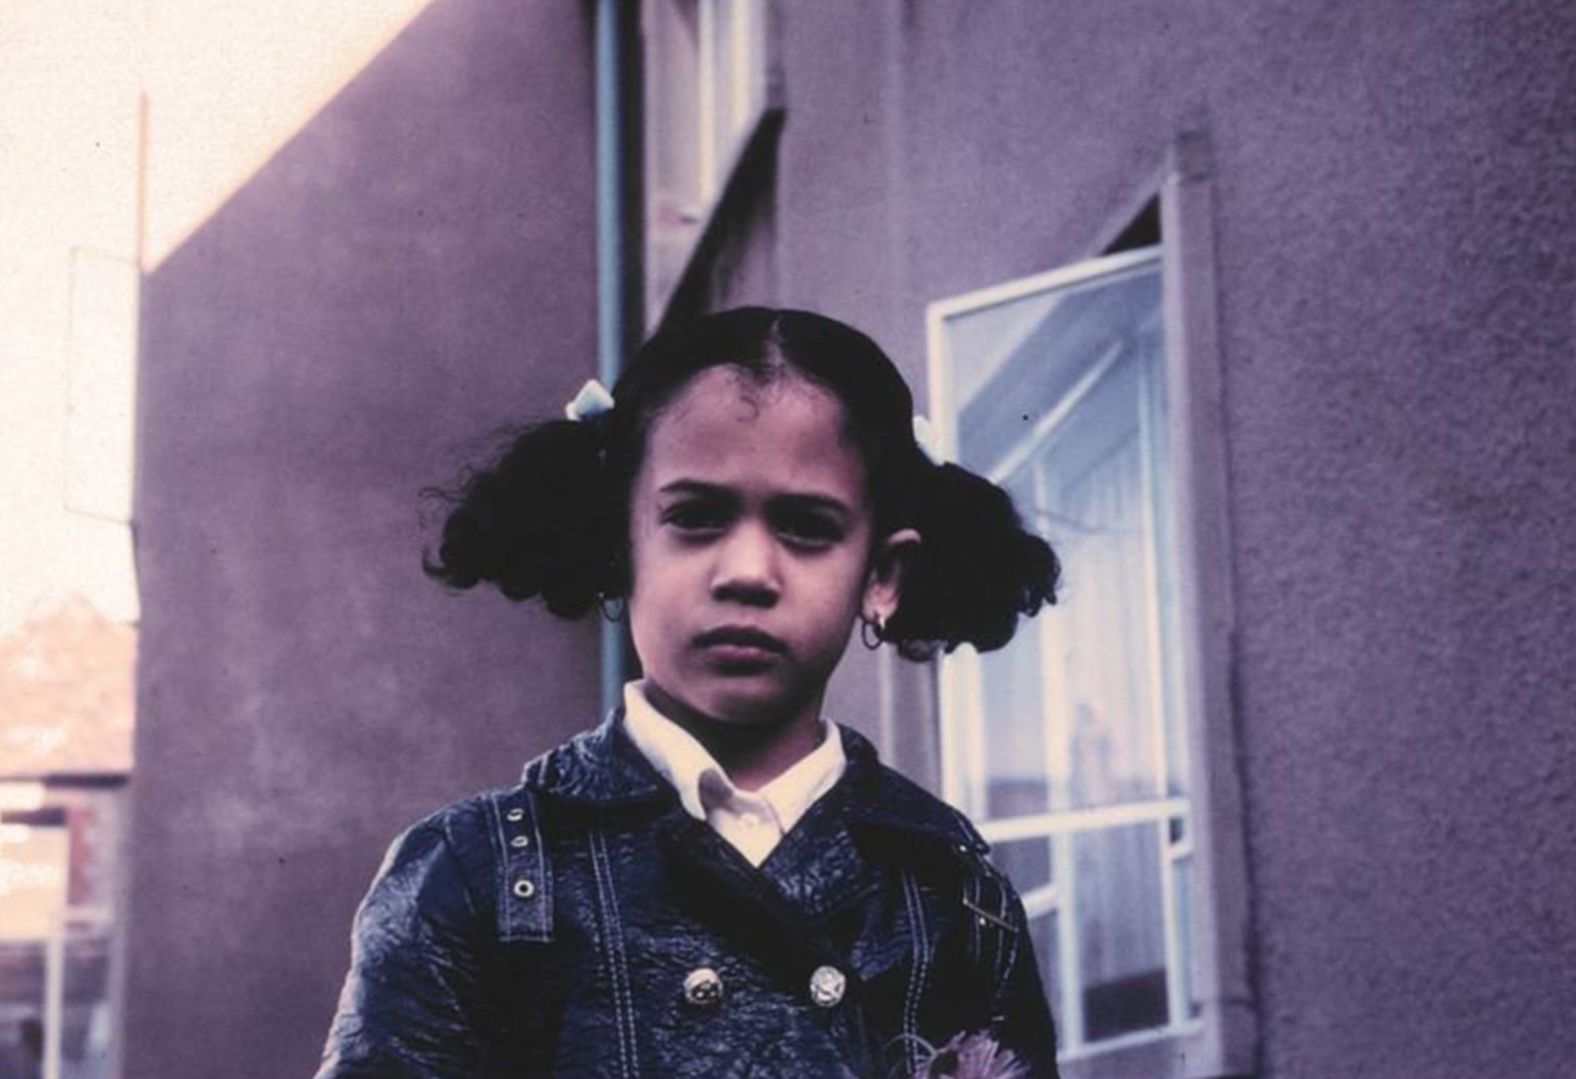 Harris tweeted this photo of her as a child after referencing it during a Democratic debate in June 2019. During the debate, <a href="index.php?page=&url=https%3A%2F%2Fwww.cnn.com%2F2019%2F06%2F28%2Fpolitics%2Fbiden-vs-harris-democratic-debate%2Findex.html" target="_blank">she confronted Joe Biden</a> over his opposition many years ago to the federal government mandating busing to integrate schools. "There was a little girl in California who was bussed to school," <a href="index.php?page=&url=https%3A%2F%2Ftwitter.com%2FKamalaHarris%2Fstatus%2F1144427976609734658" target="_blank" target="_blank">she tweeted.</a> "That little girl was me."